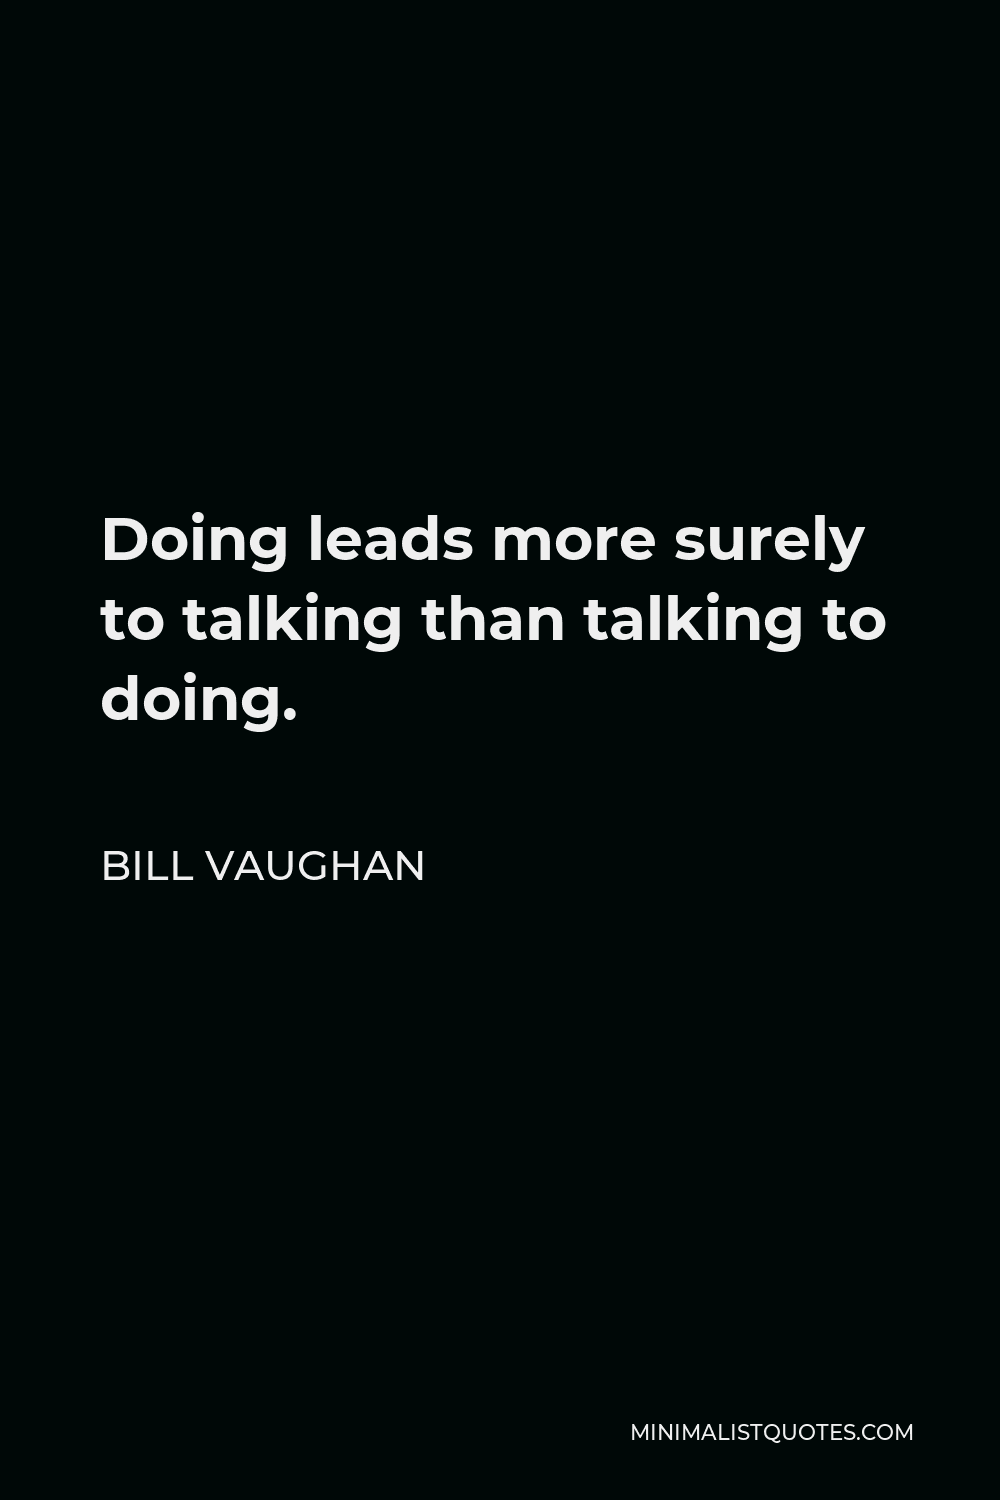 Bill Vaughan Quote - Doing leads more surely to talking than talking to doing.